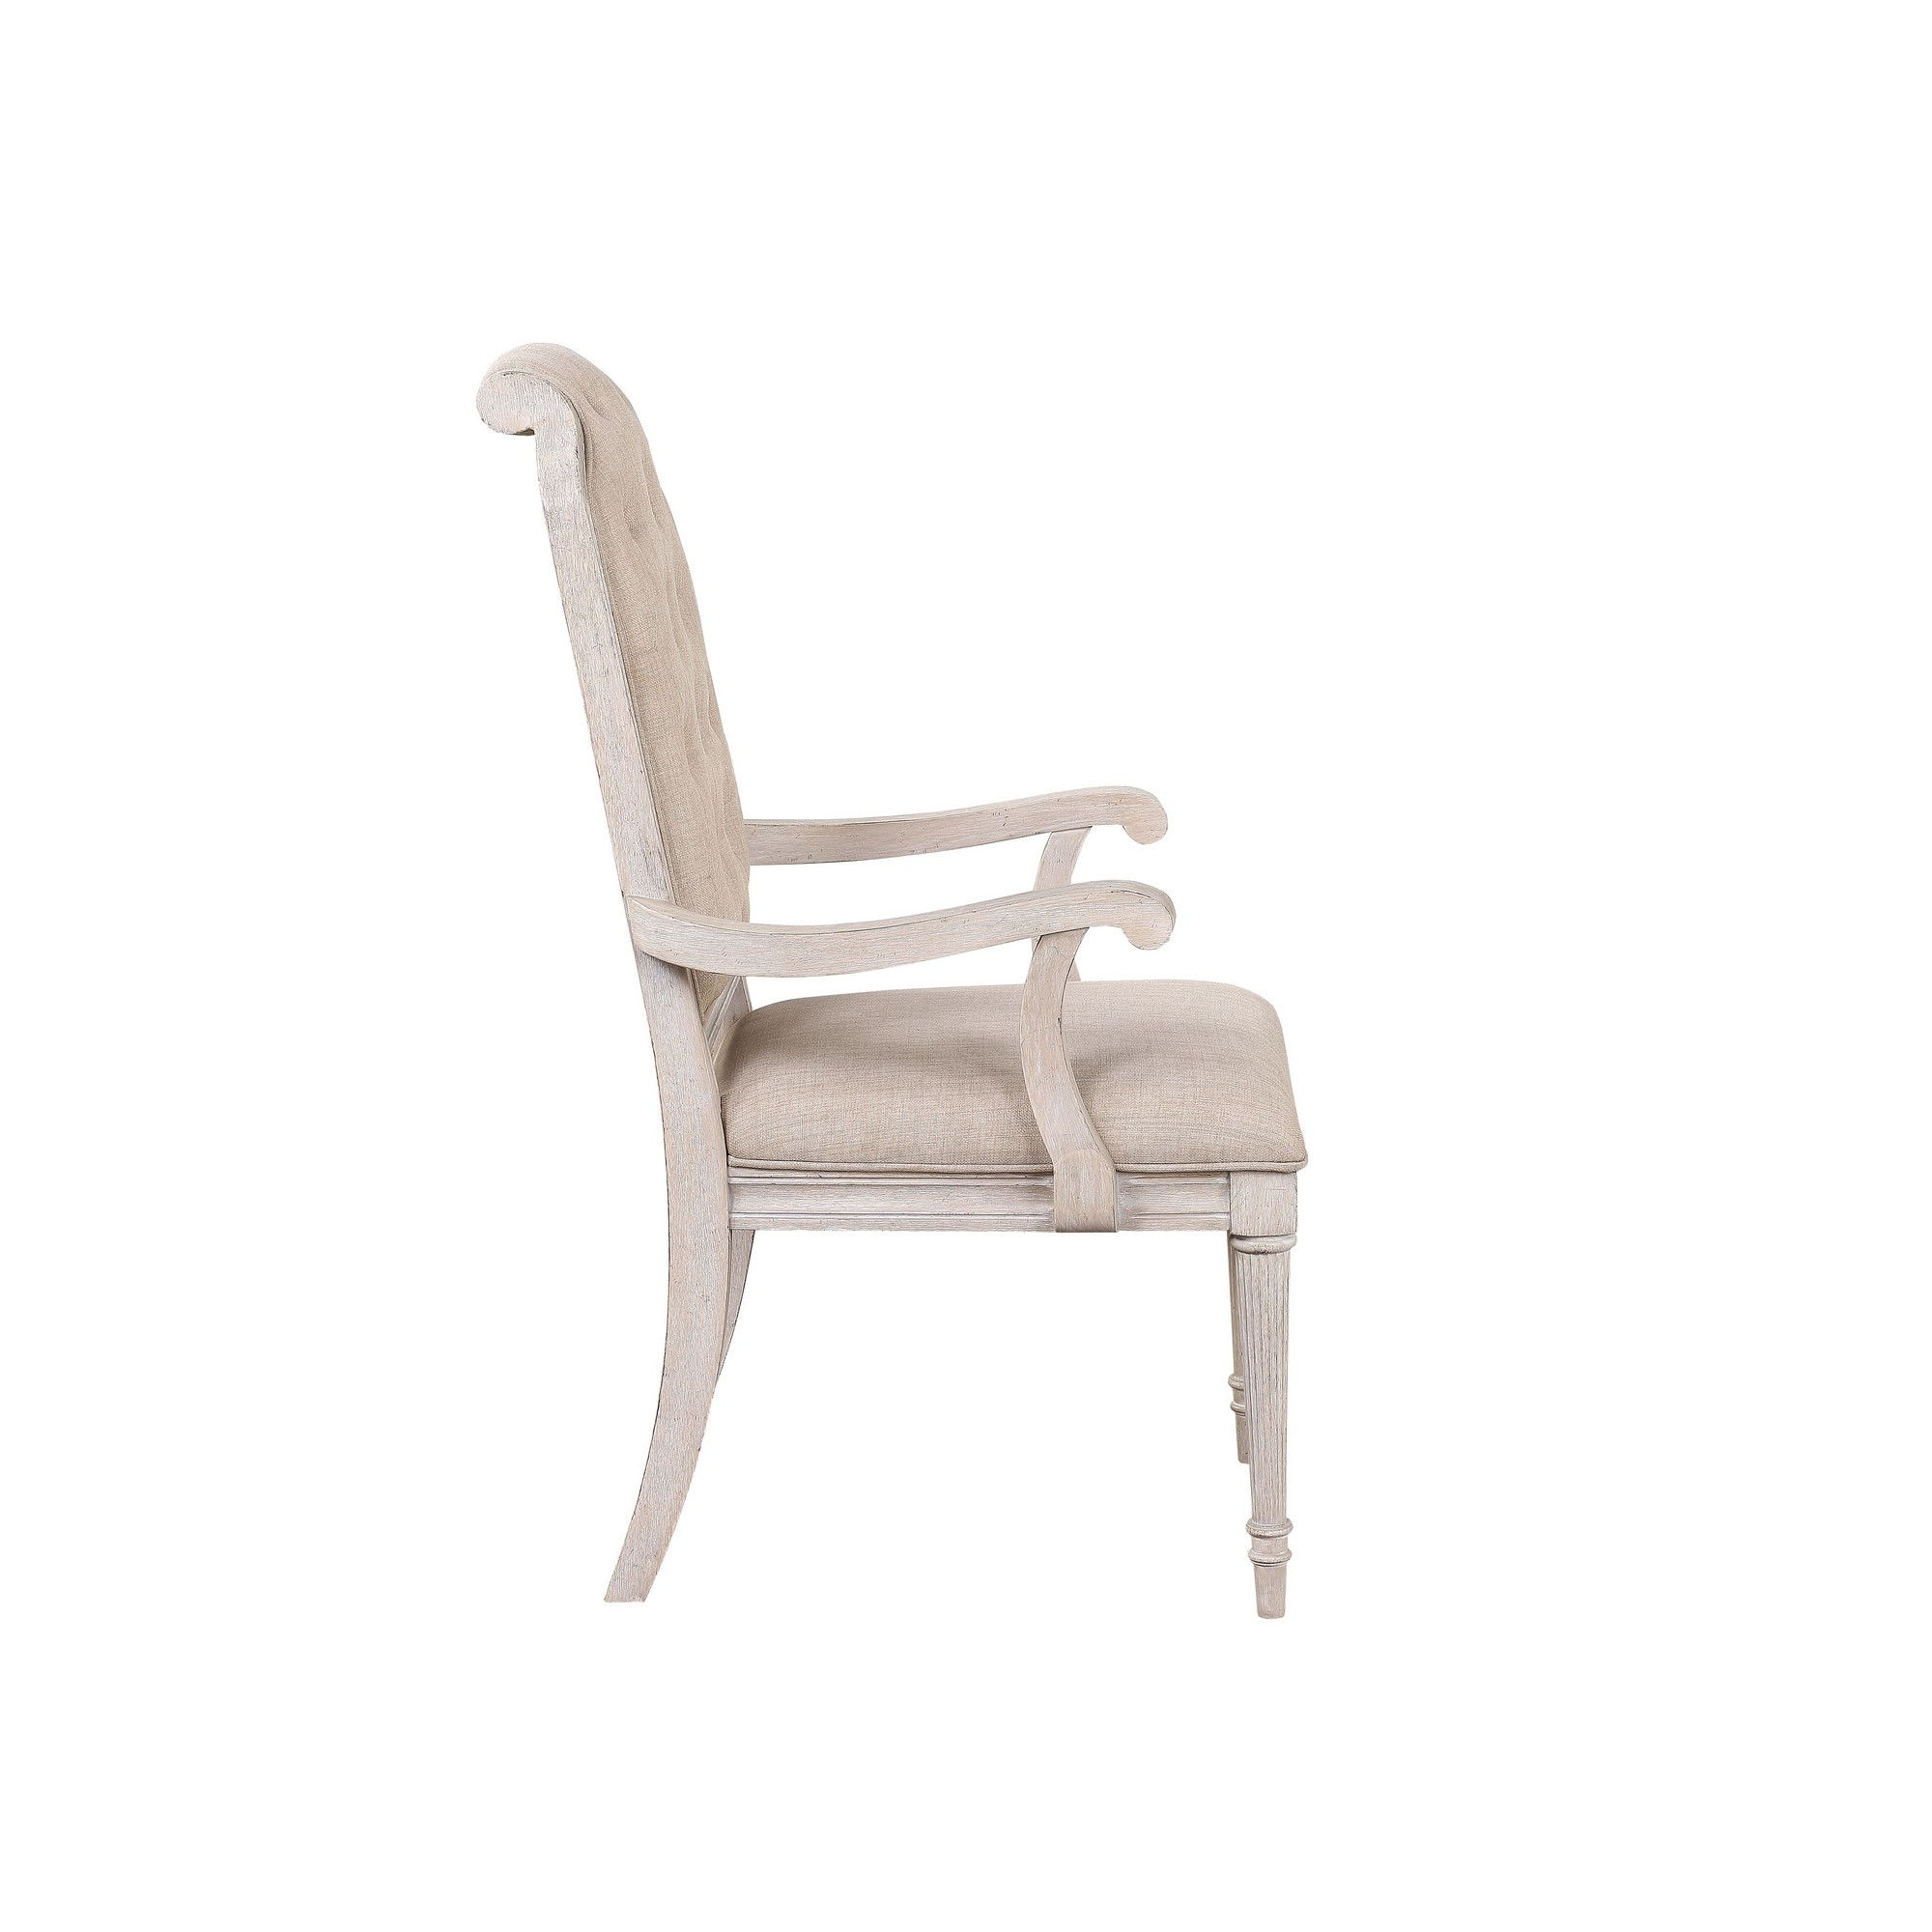 Arm Chair With Padded Seat And Button Tufts, Set Of 2, Beige- Saltoro Sherpi